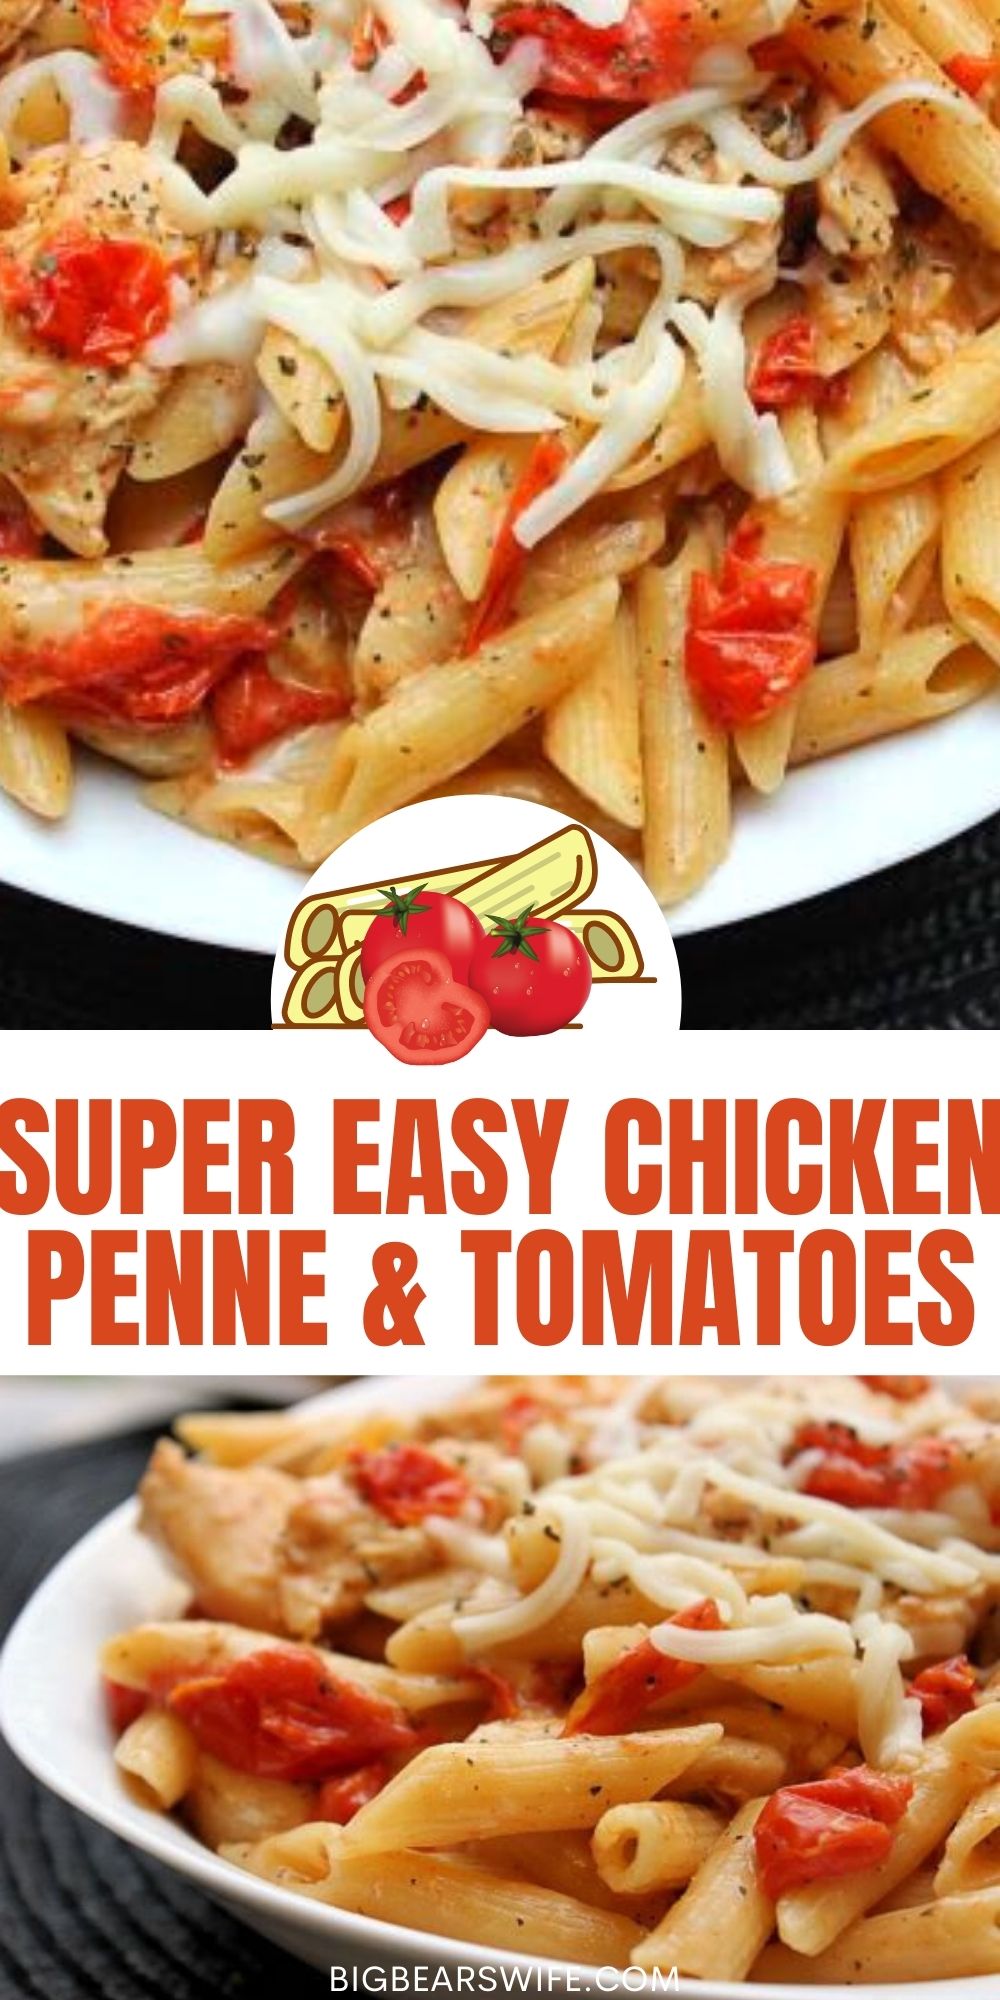 This Super Easy Chicken Penne & Tomatoes is a Pampered Chef Grilled Chicken Penne al Fresco Recipe that I got from a friend years ago. It is a great easy dinner recipe!! 
 via @bigbearswife